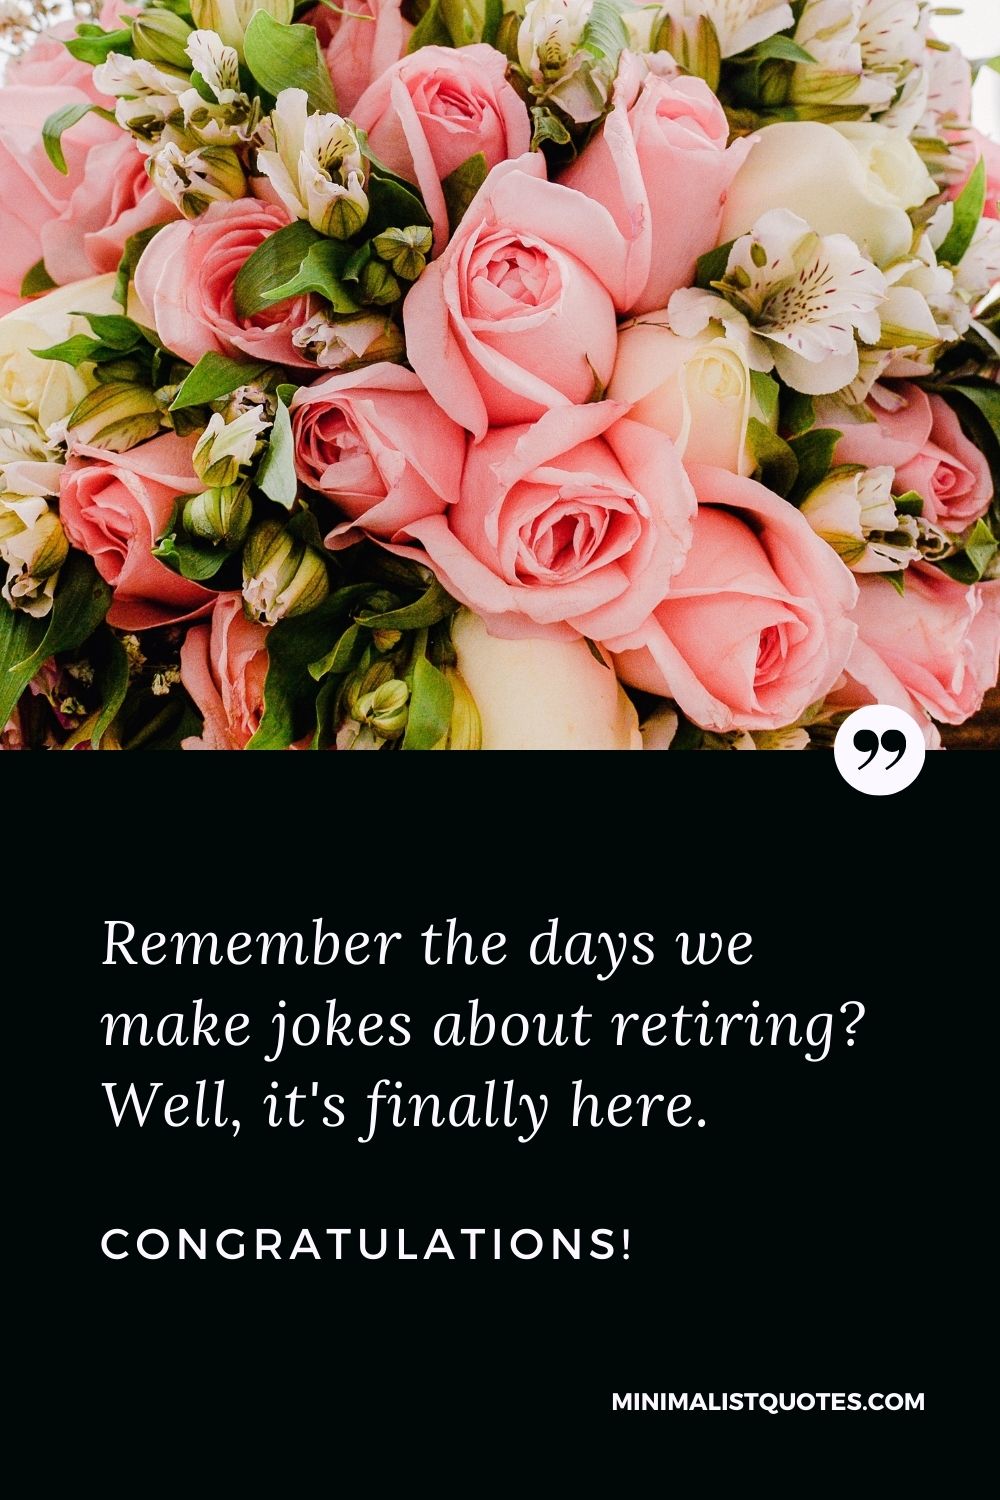 Retirement Wish, Message & Quote With Image: Remember the days we make jokes about retiring? Well, it's finally here. Congratulations!